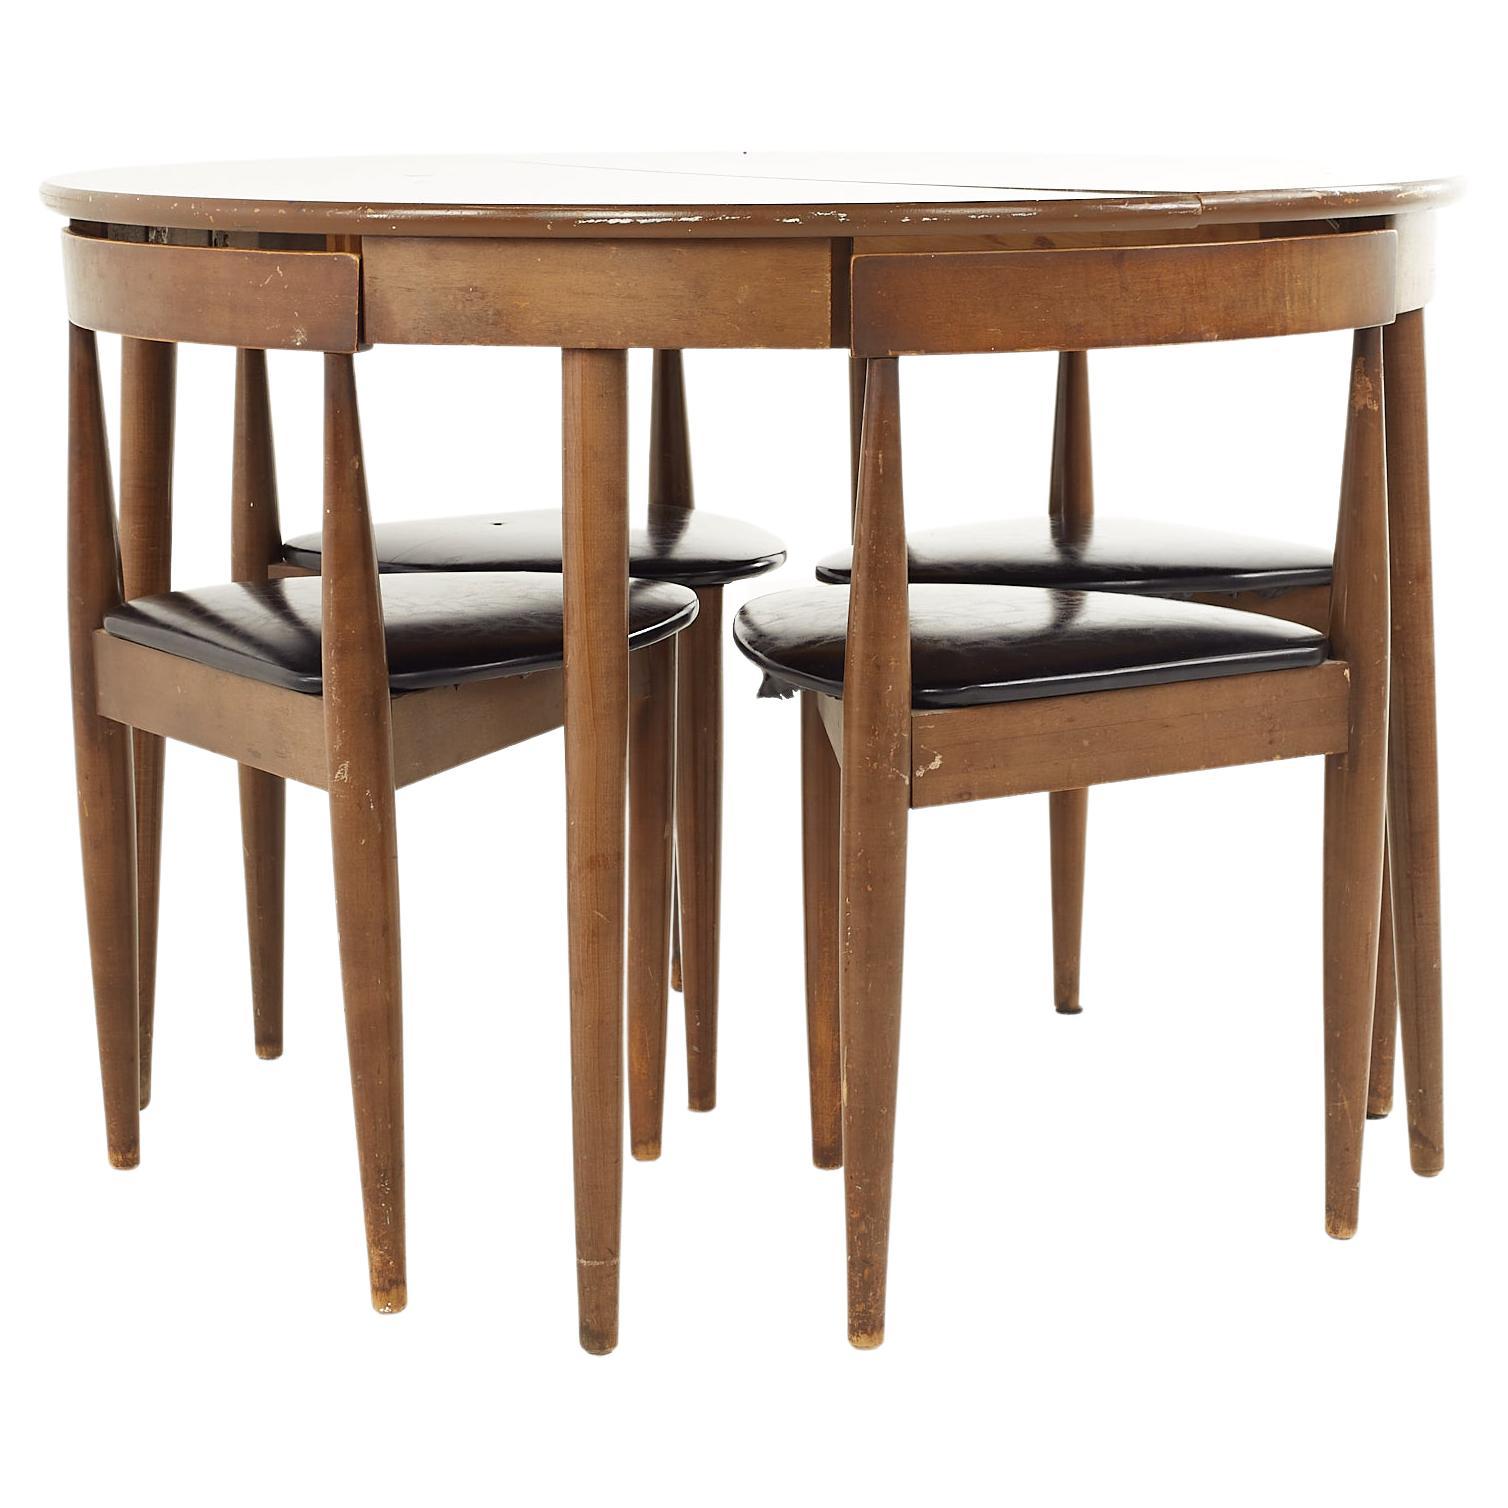 Hans Olsen Style Walnut and Laminate Dining Table with 4 Nesting Chairs